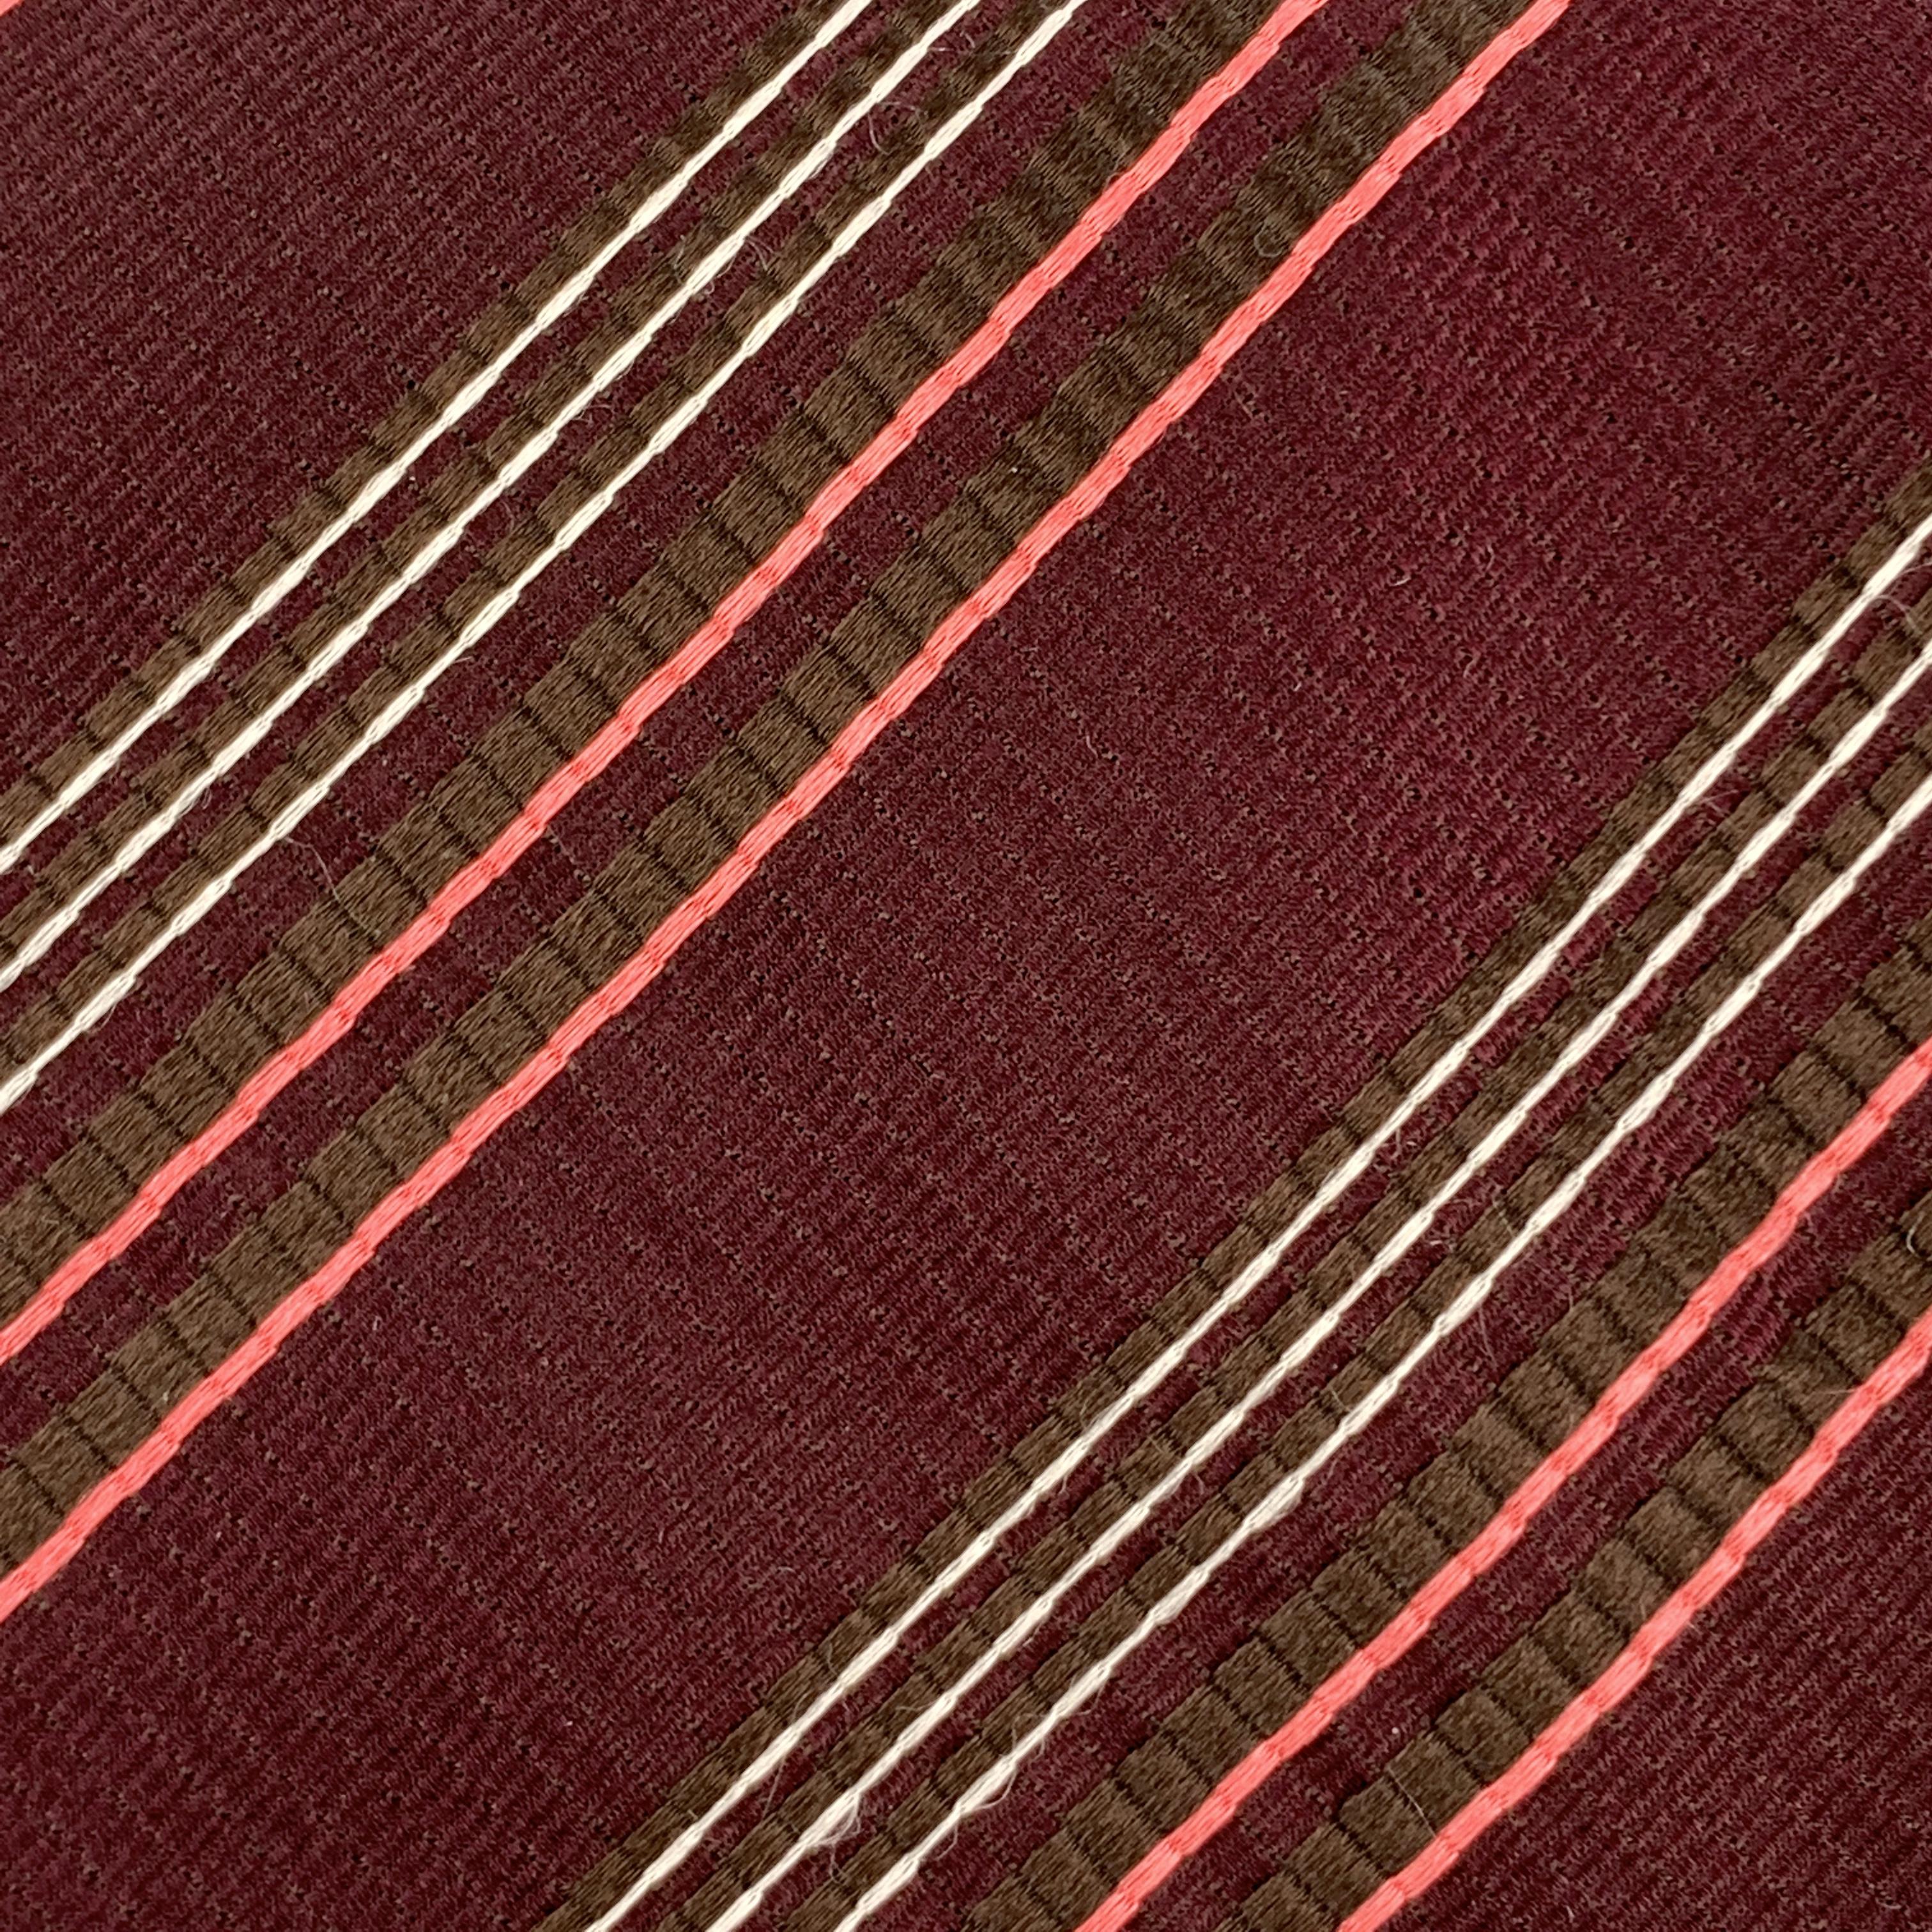 GIORGIO ARMANI necktie comes in burgundy textured silk with all over diagonal striped print. Made in Italy.

Excellent Pre-Owned Condition.

Width: 3.75 in.